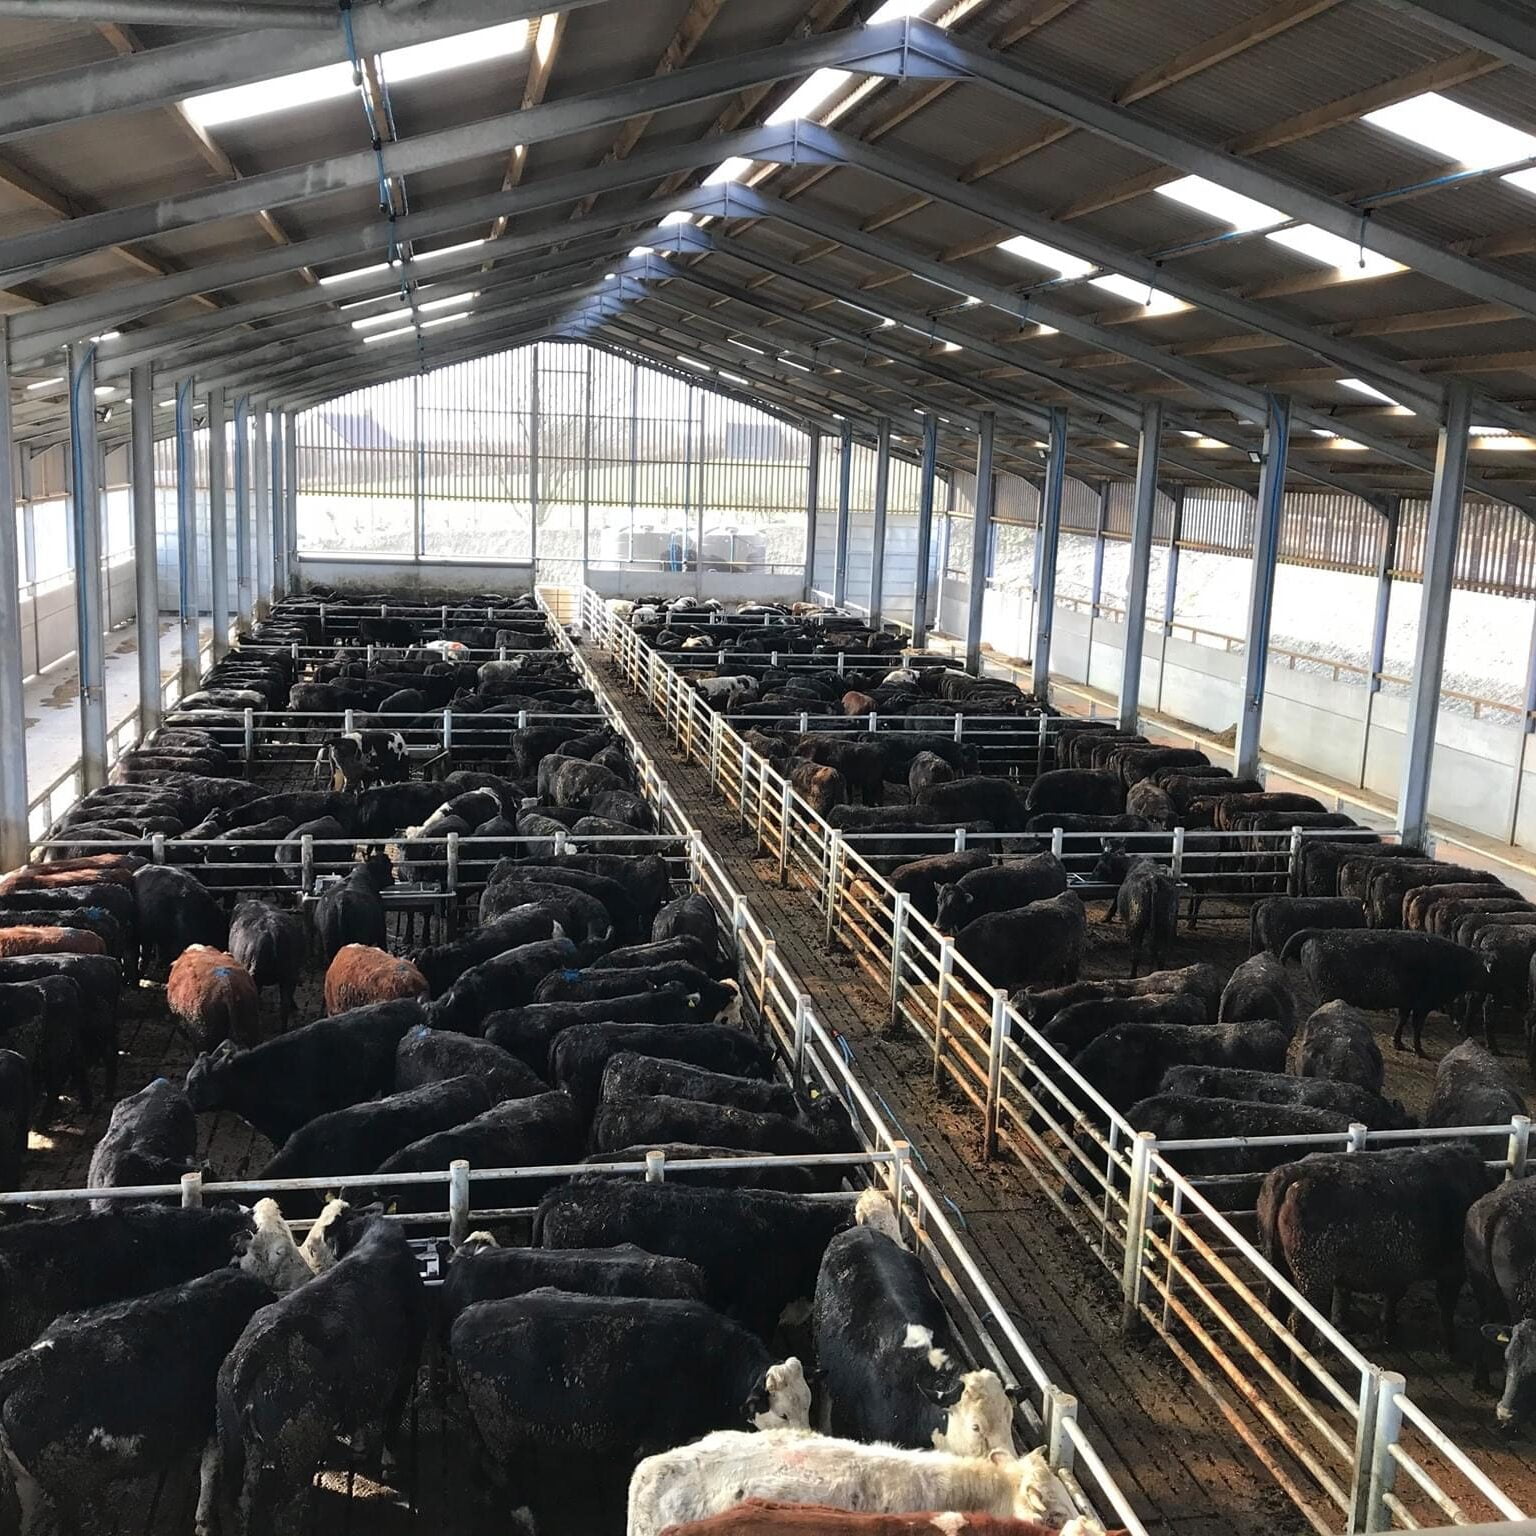 Cattle shed with black cows in separated pens with windows on every side of the shed